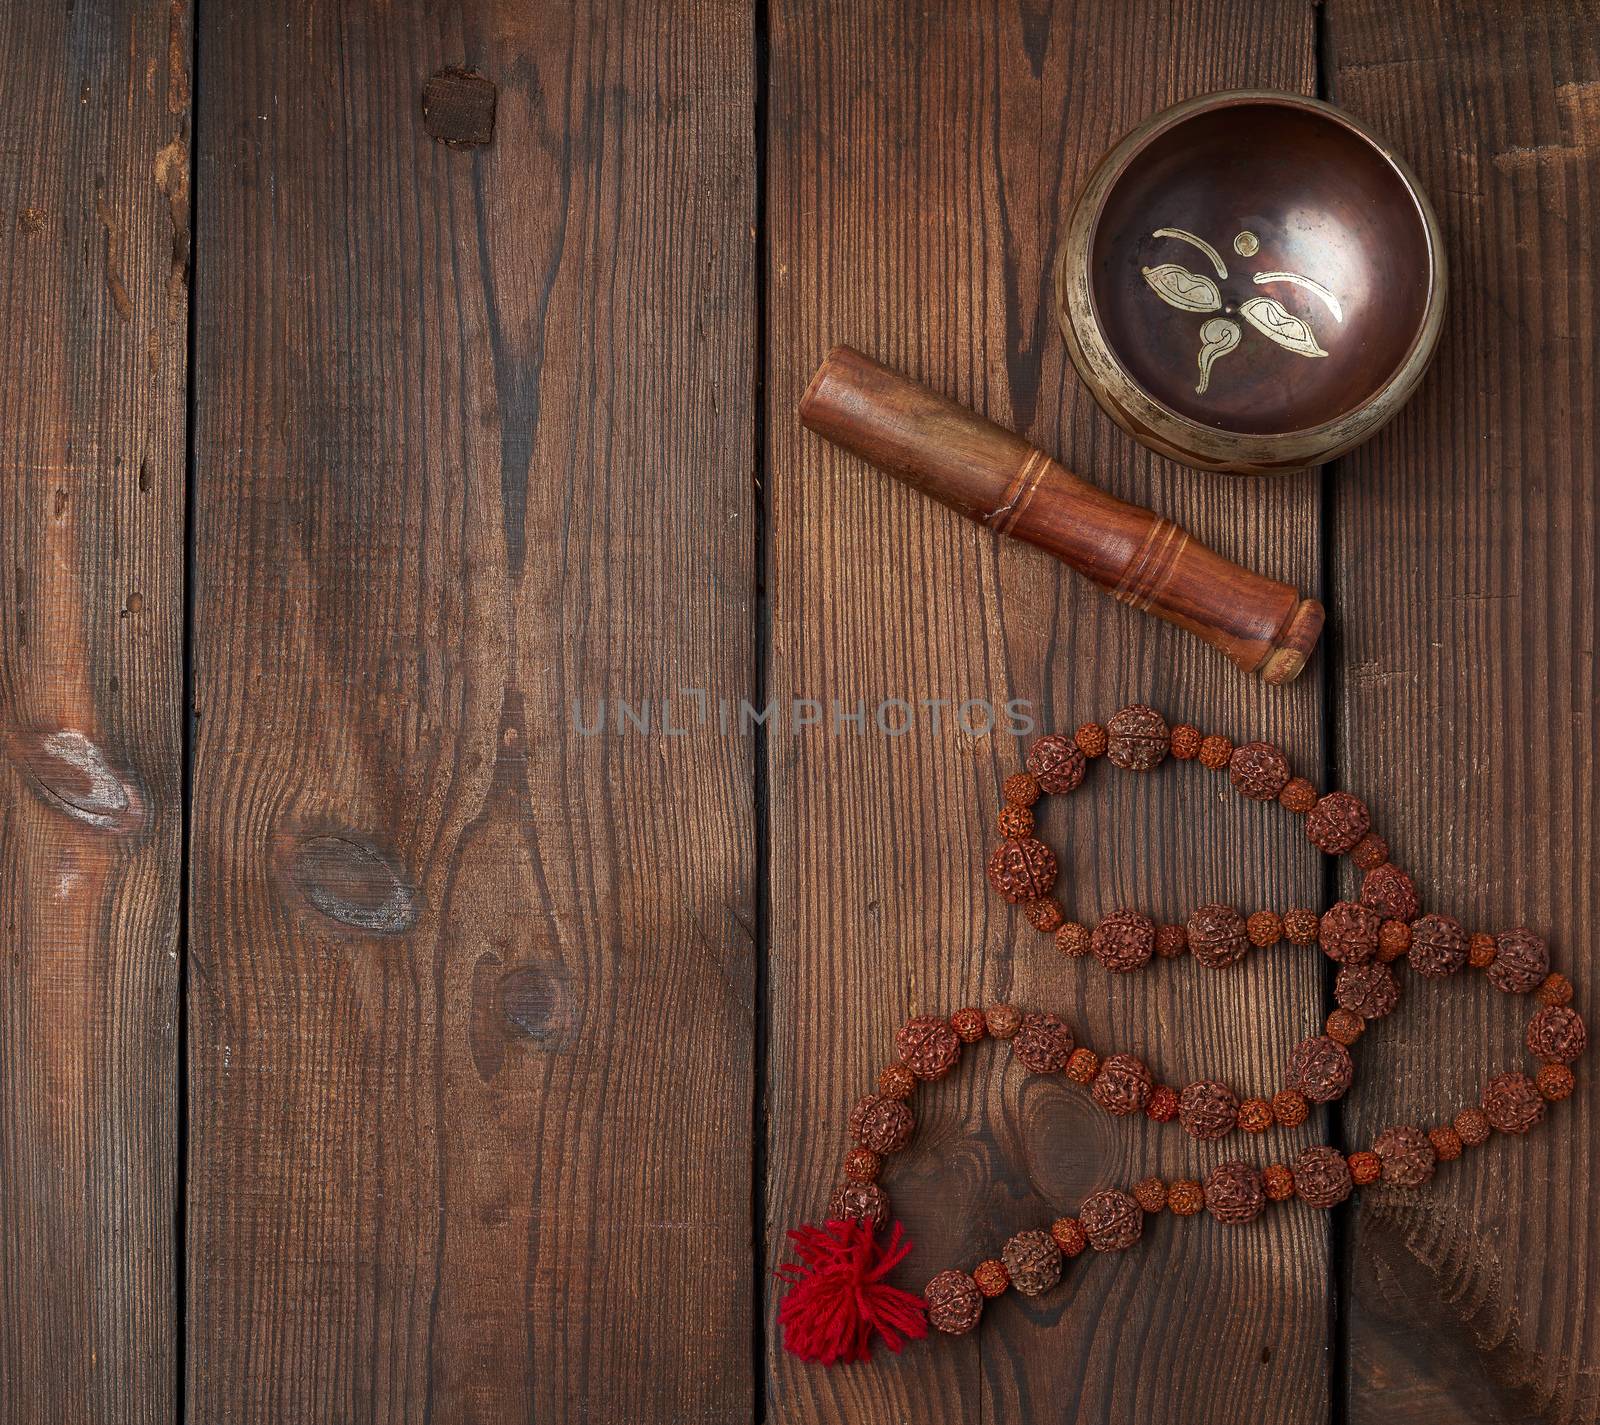 singing Tibetan copper bowl and wooden stick  by ndanko